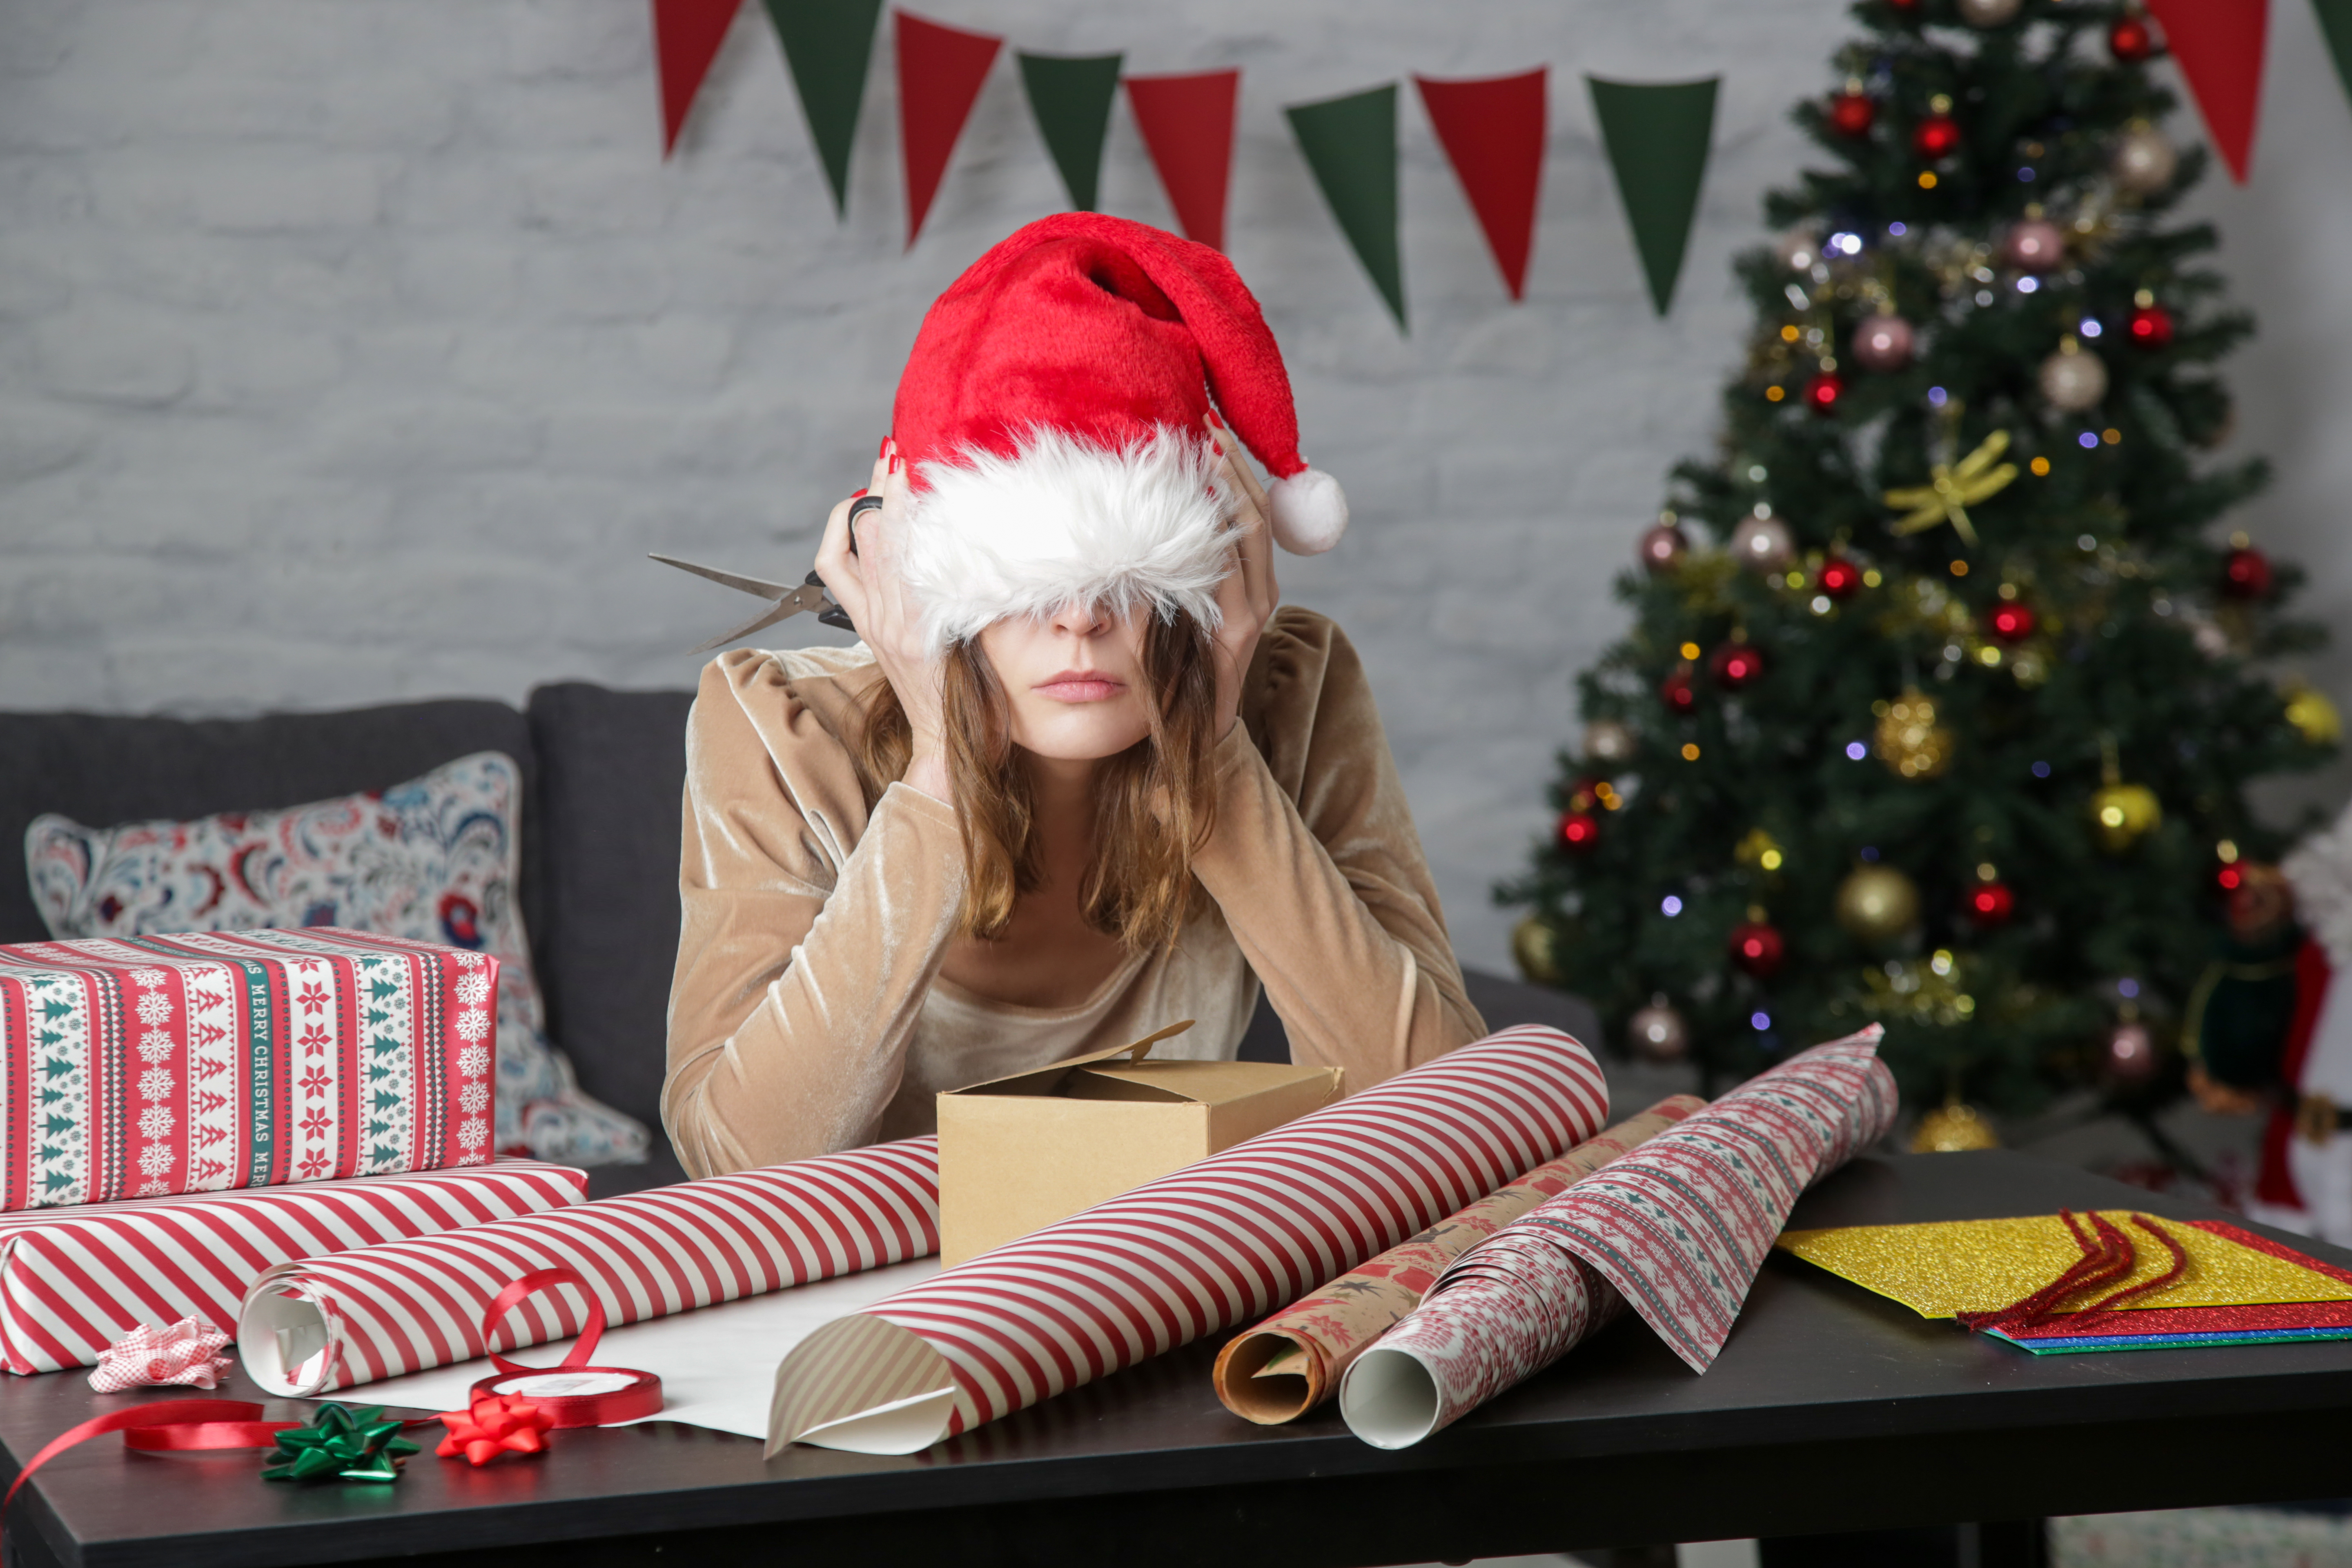 Holiday scene with decorated tree in background and woman with a Santa hat pulled over her eyes with piles of gift wrap